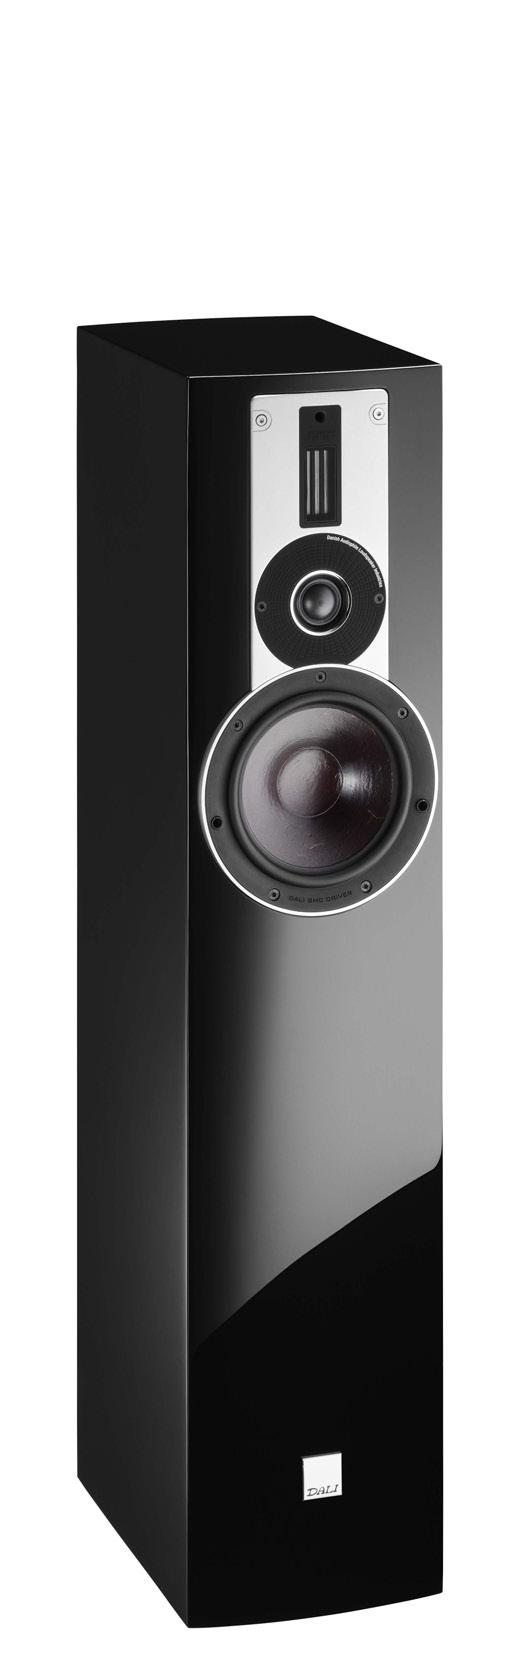 RUBICON 5 is a floor standing speaker. It expands the sonic performance of the RUBICON 2 by adding a hybrid tweeter and a larger cabinet offering more of everything.